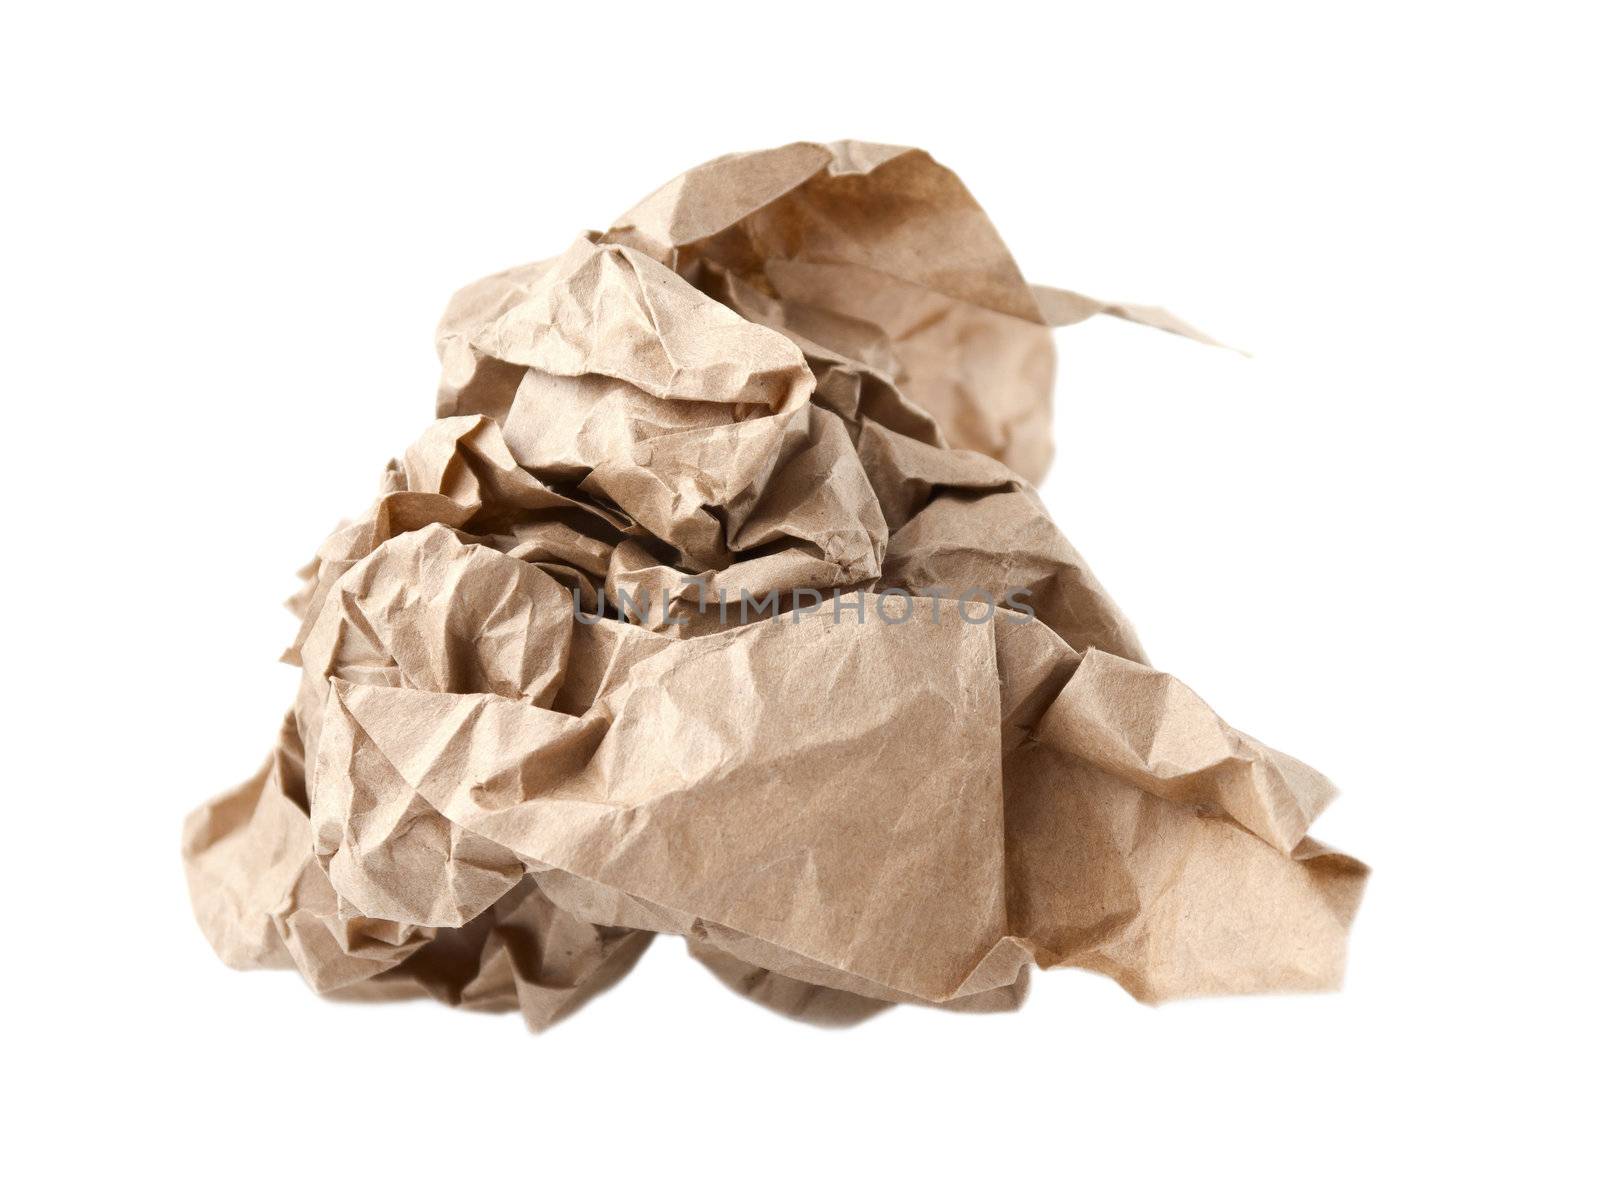 Ball of crumpled paper on white background